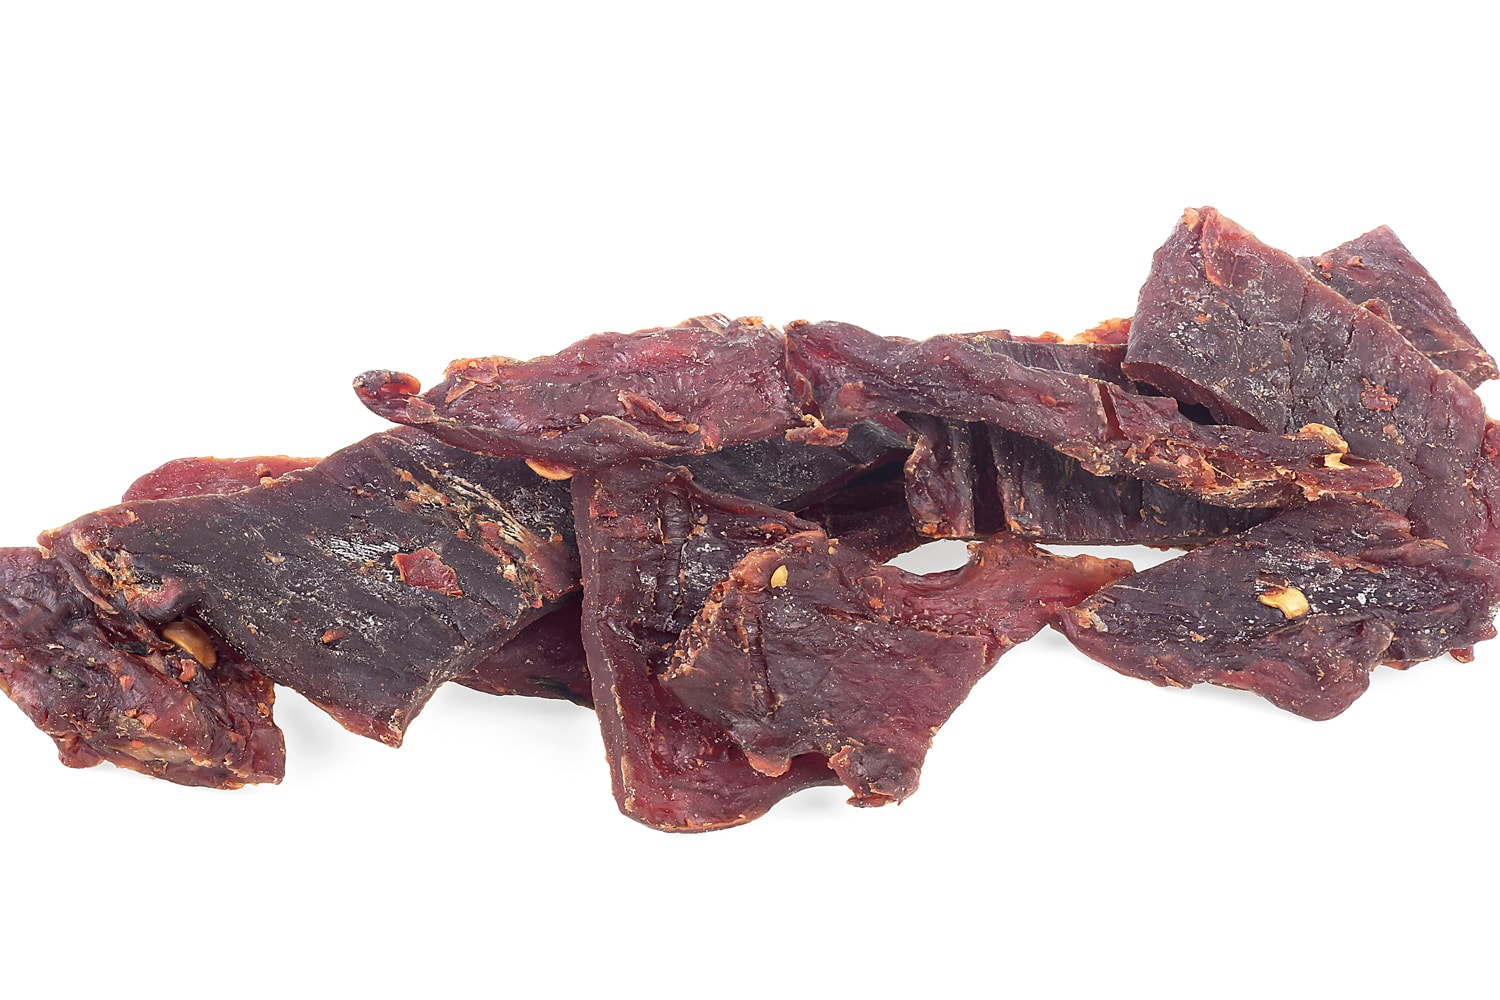 Portion of spices beef jerky pieces isolated on a white background